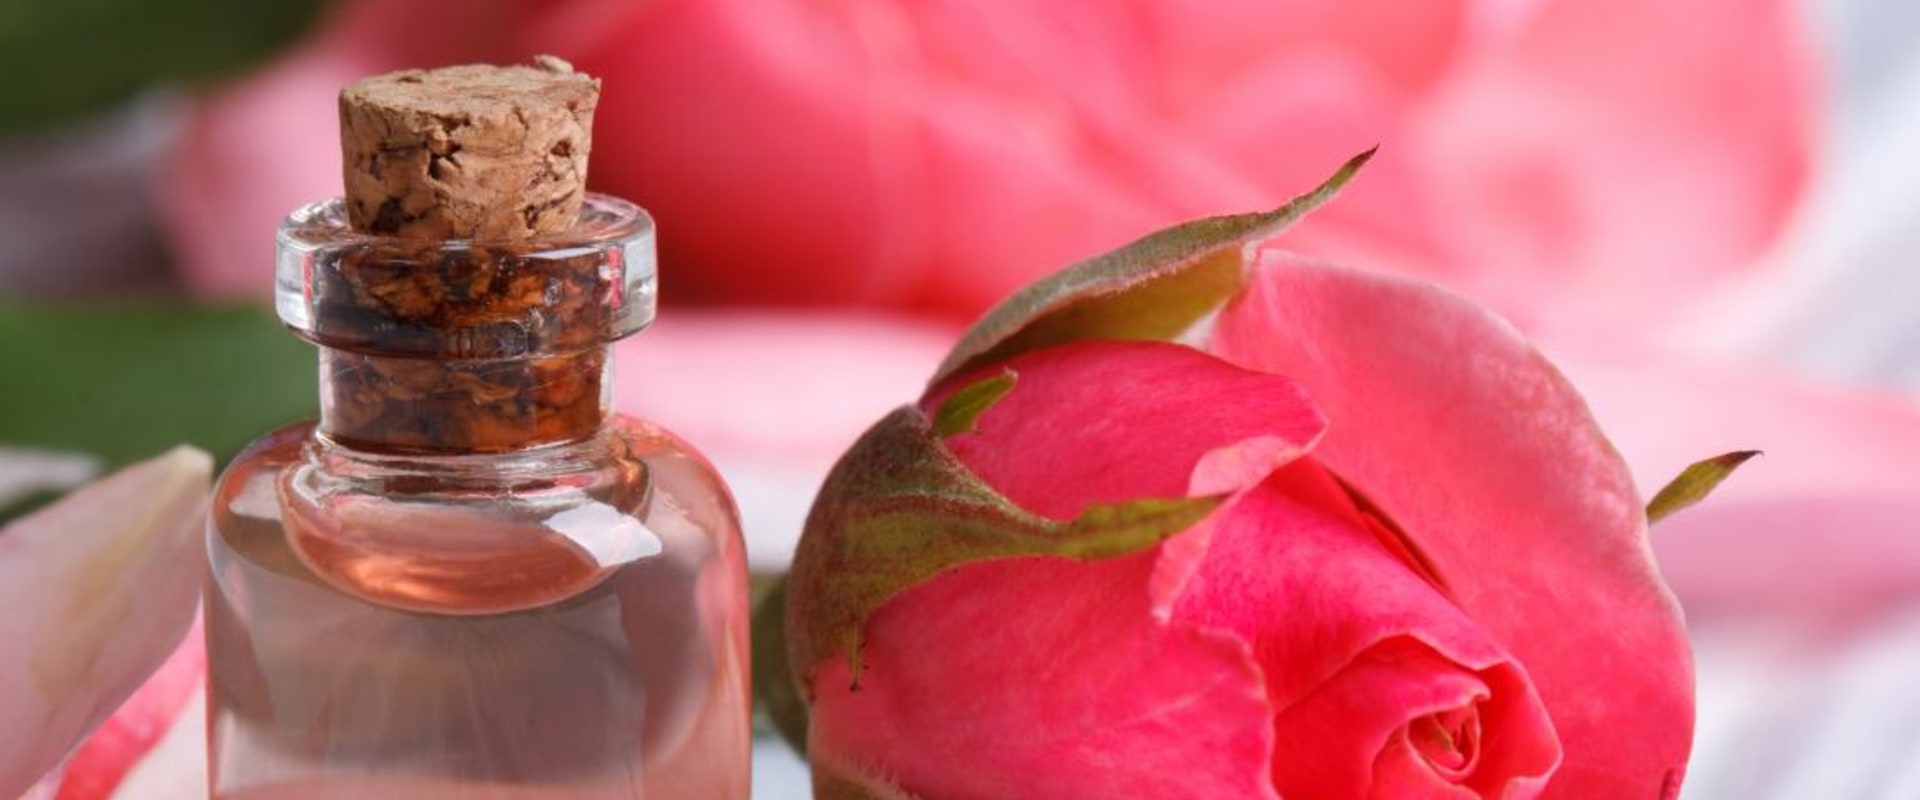 Rose Fragrances: An Informative Overview